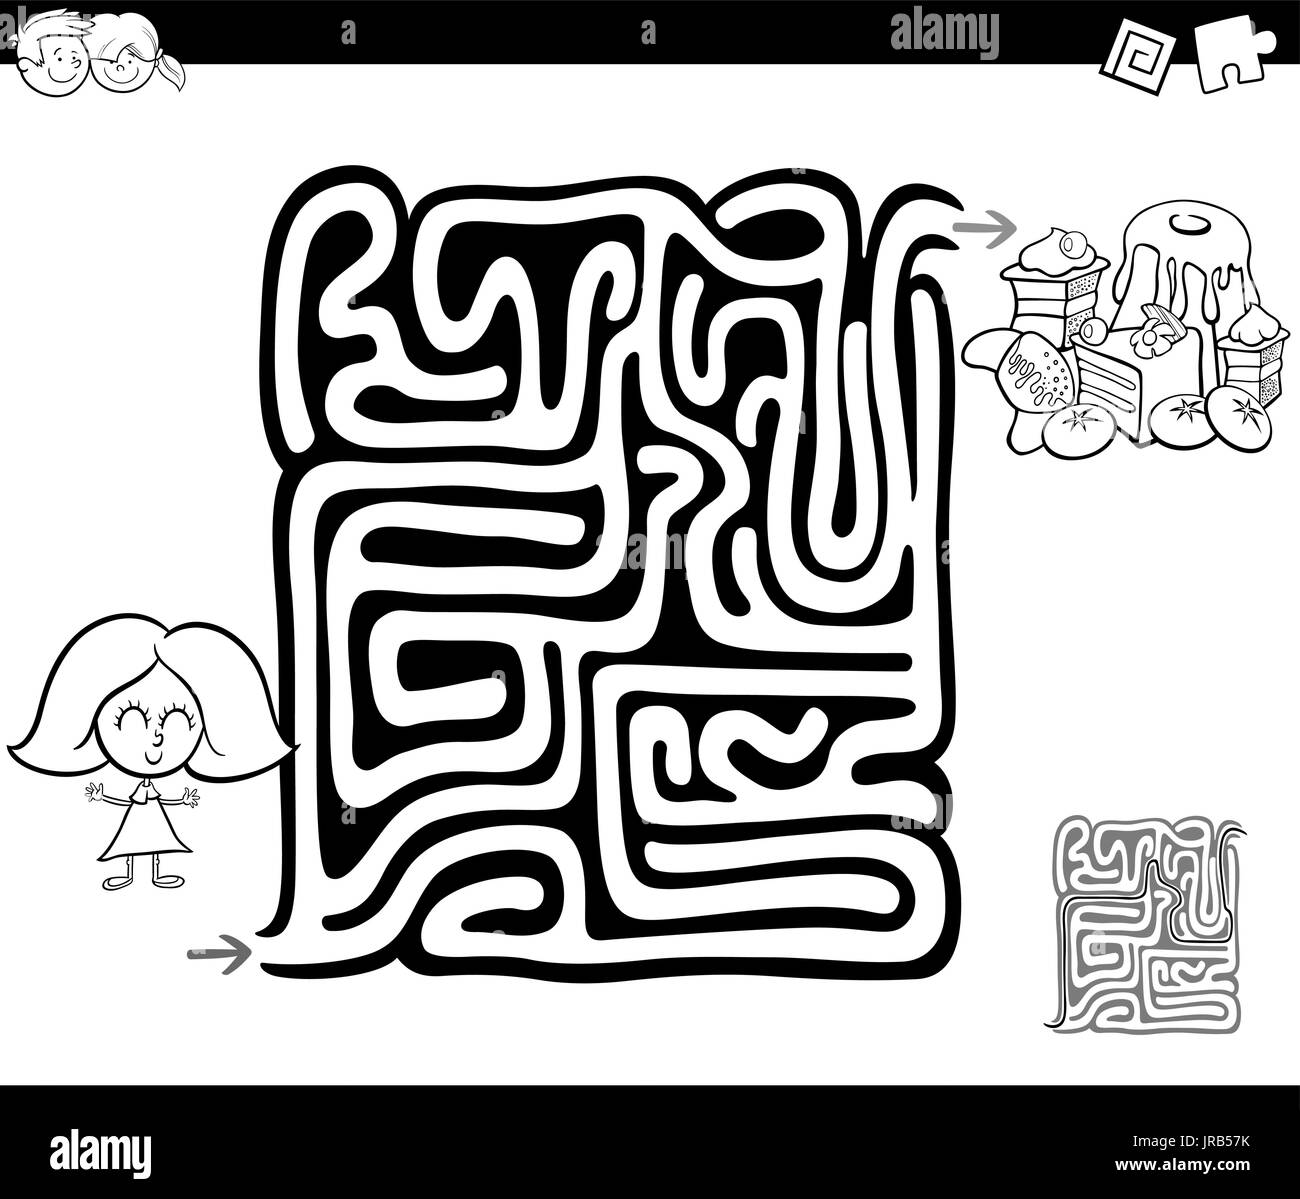 Black and White Cartoon Illustration of Education Maze or Labyrinth Game for Children with Little Girl and Sweet Food Coloring Page Stock Vector